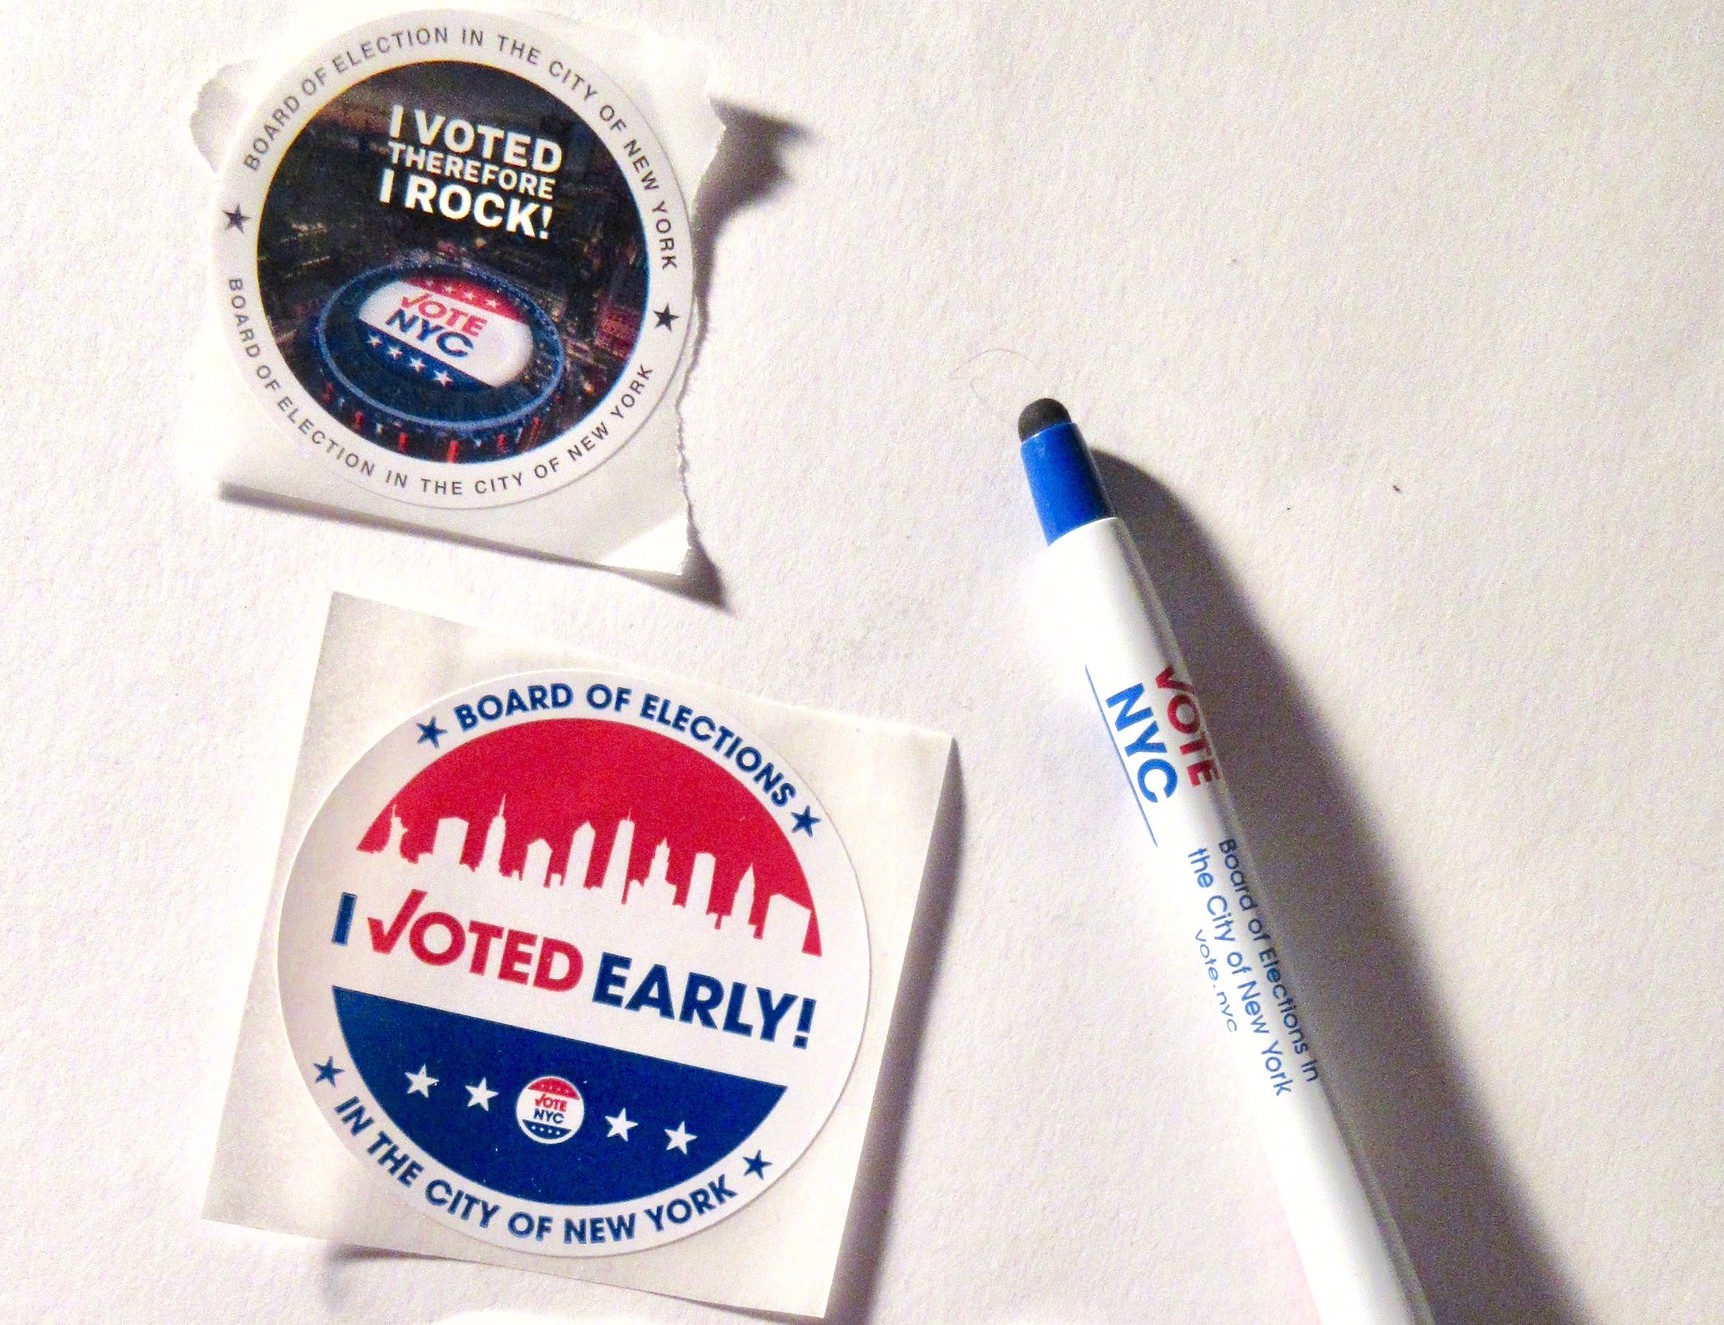 A sticker reads "Board of Election in the City of New York, I voted therefore I rock!" and another reads "I voted early." Next to the stickers is a red, white, and blue pen that reads "Vote NYC, Board of Elections in the City of New York"